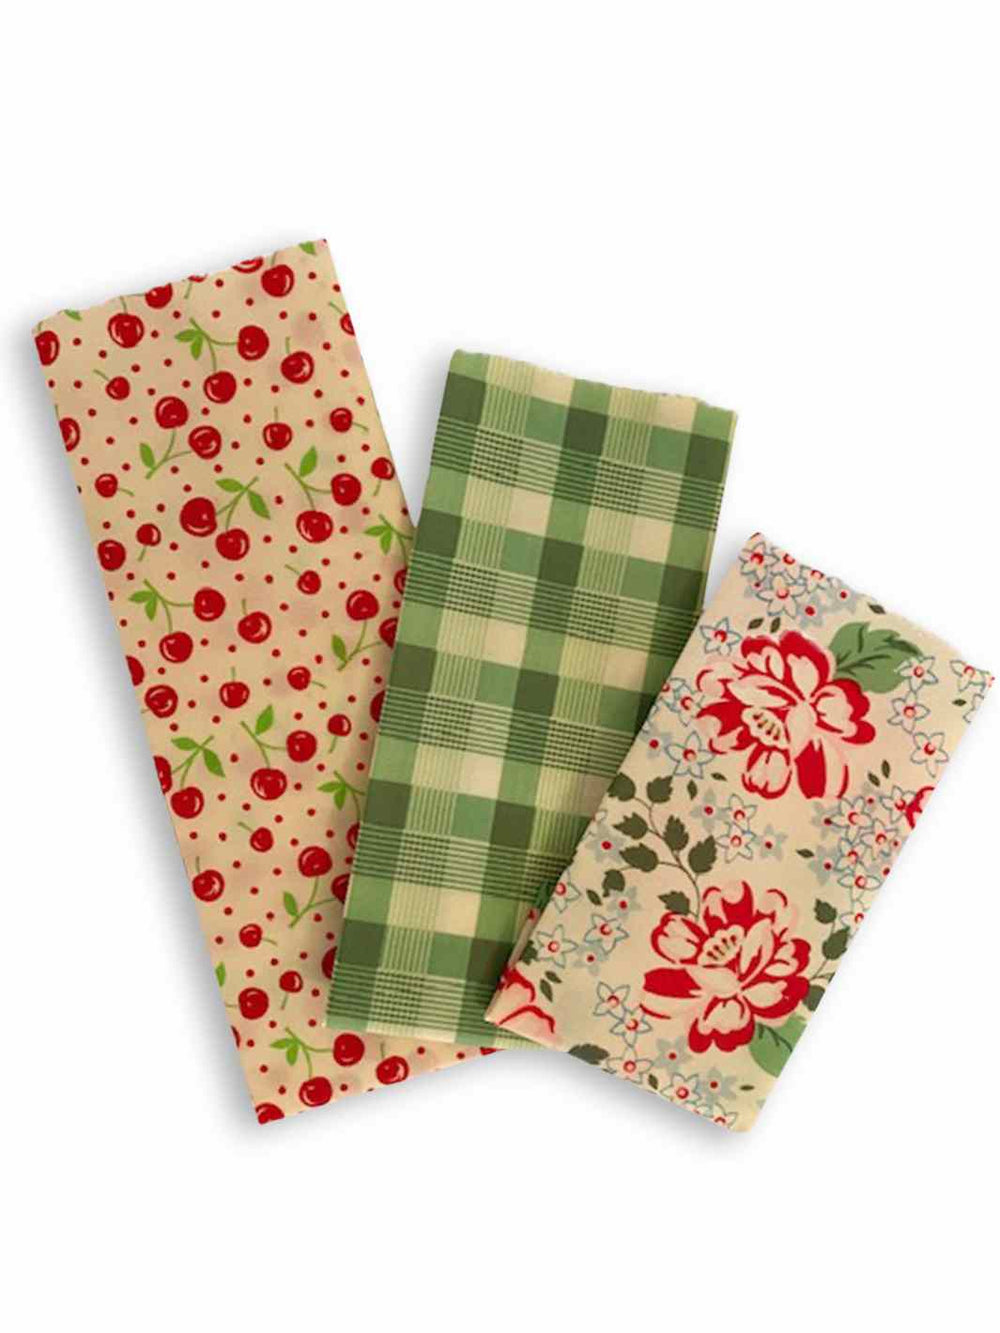 Good Soul Shop Set of three beeswax food wraps in red cherries, green plaid, and red floral pattern fanned out